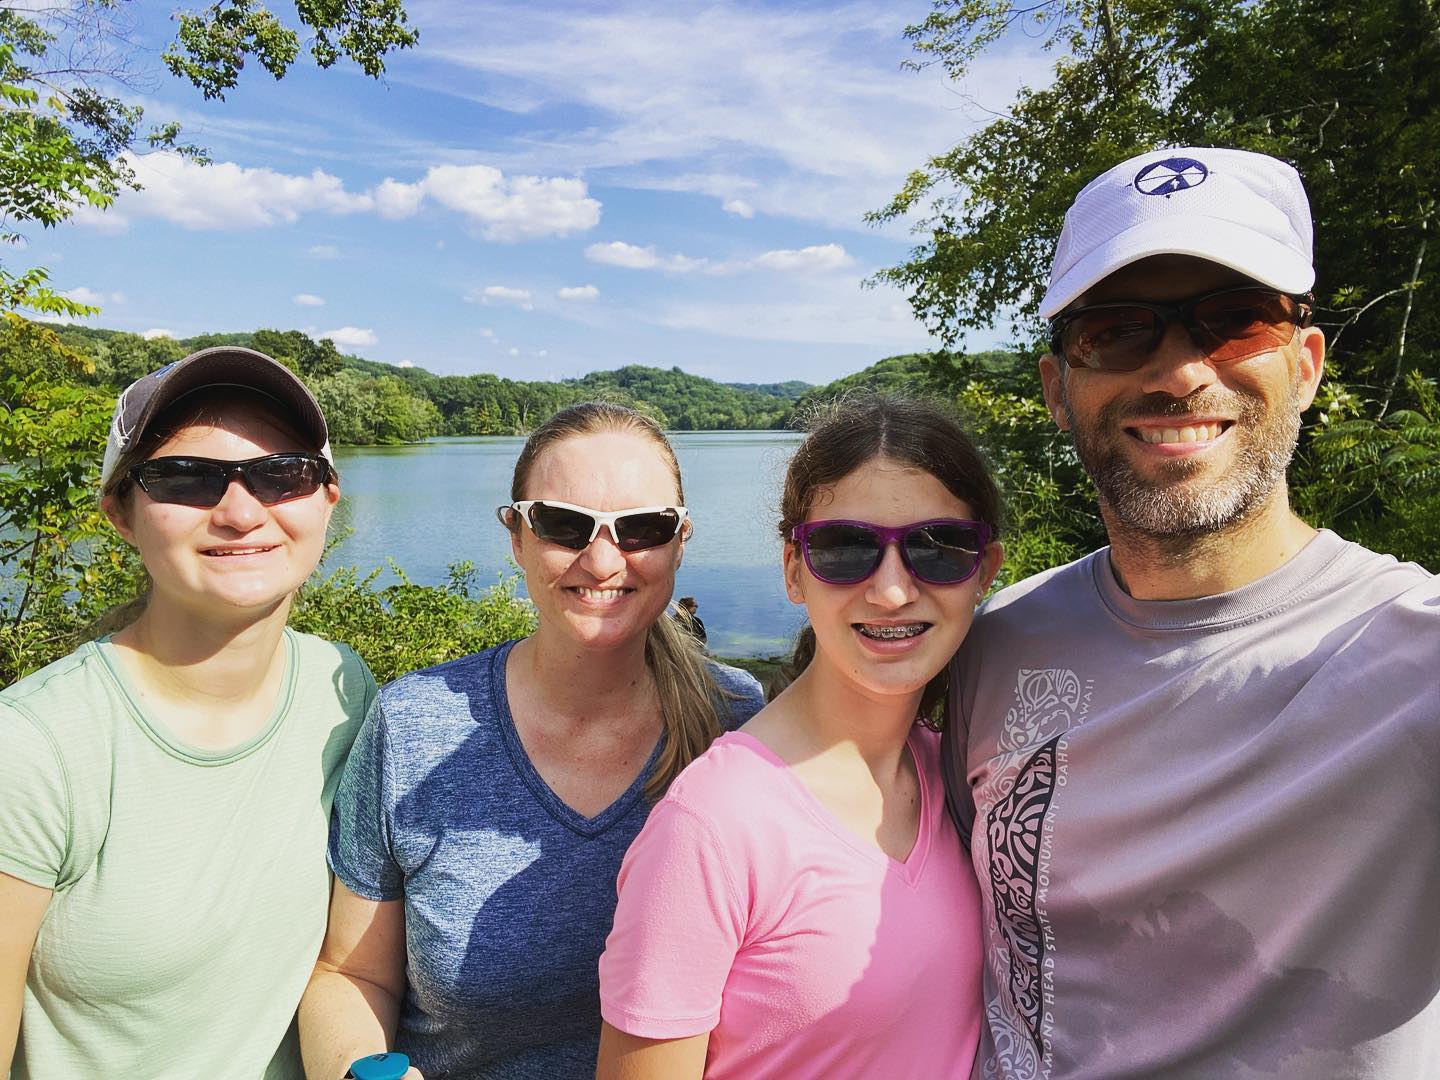 Beautiful afternoon for a 3.75-mile hike with the family at Radnor Lake. This followed a 12-mile early morning run with Brian and a 4-mile mid morning run with Sara, Brian, and Bennet (Sara’s longest run ever). #family #running #hiking